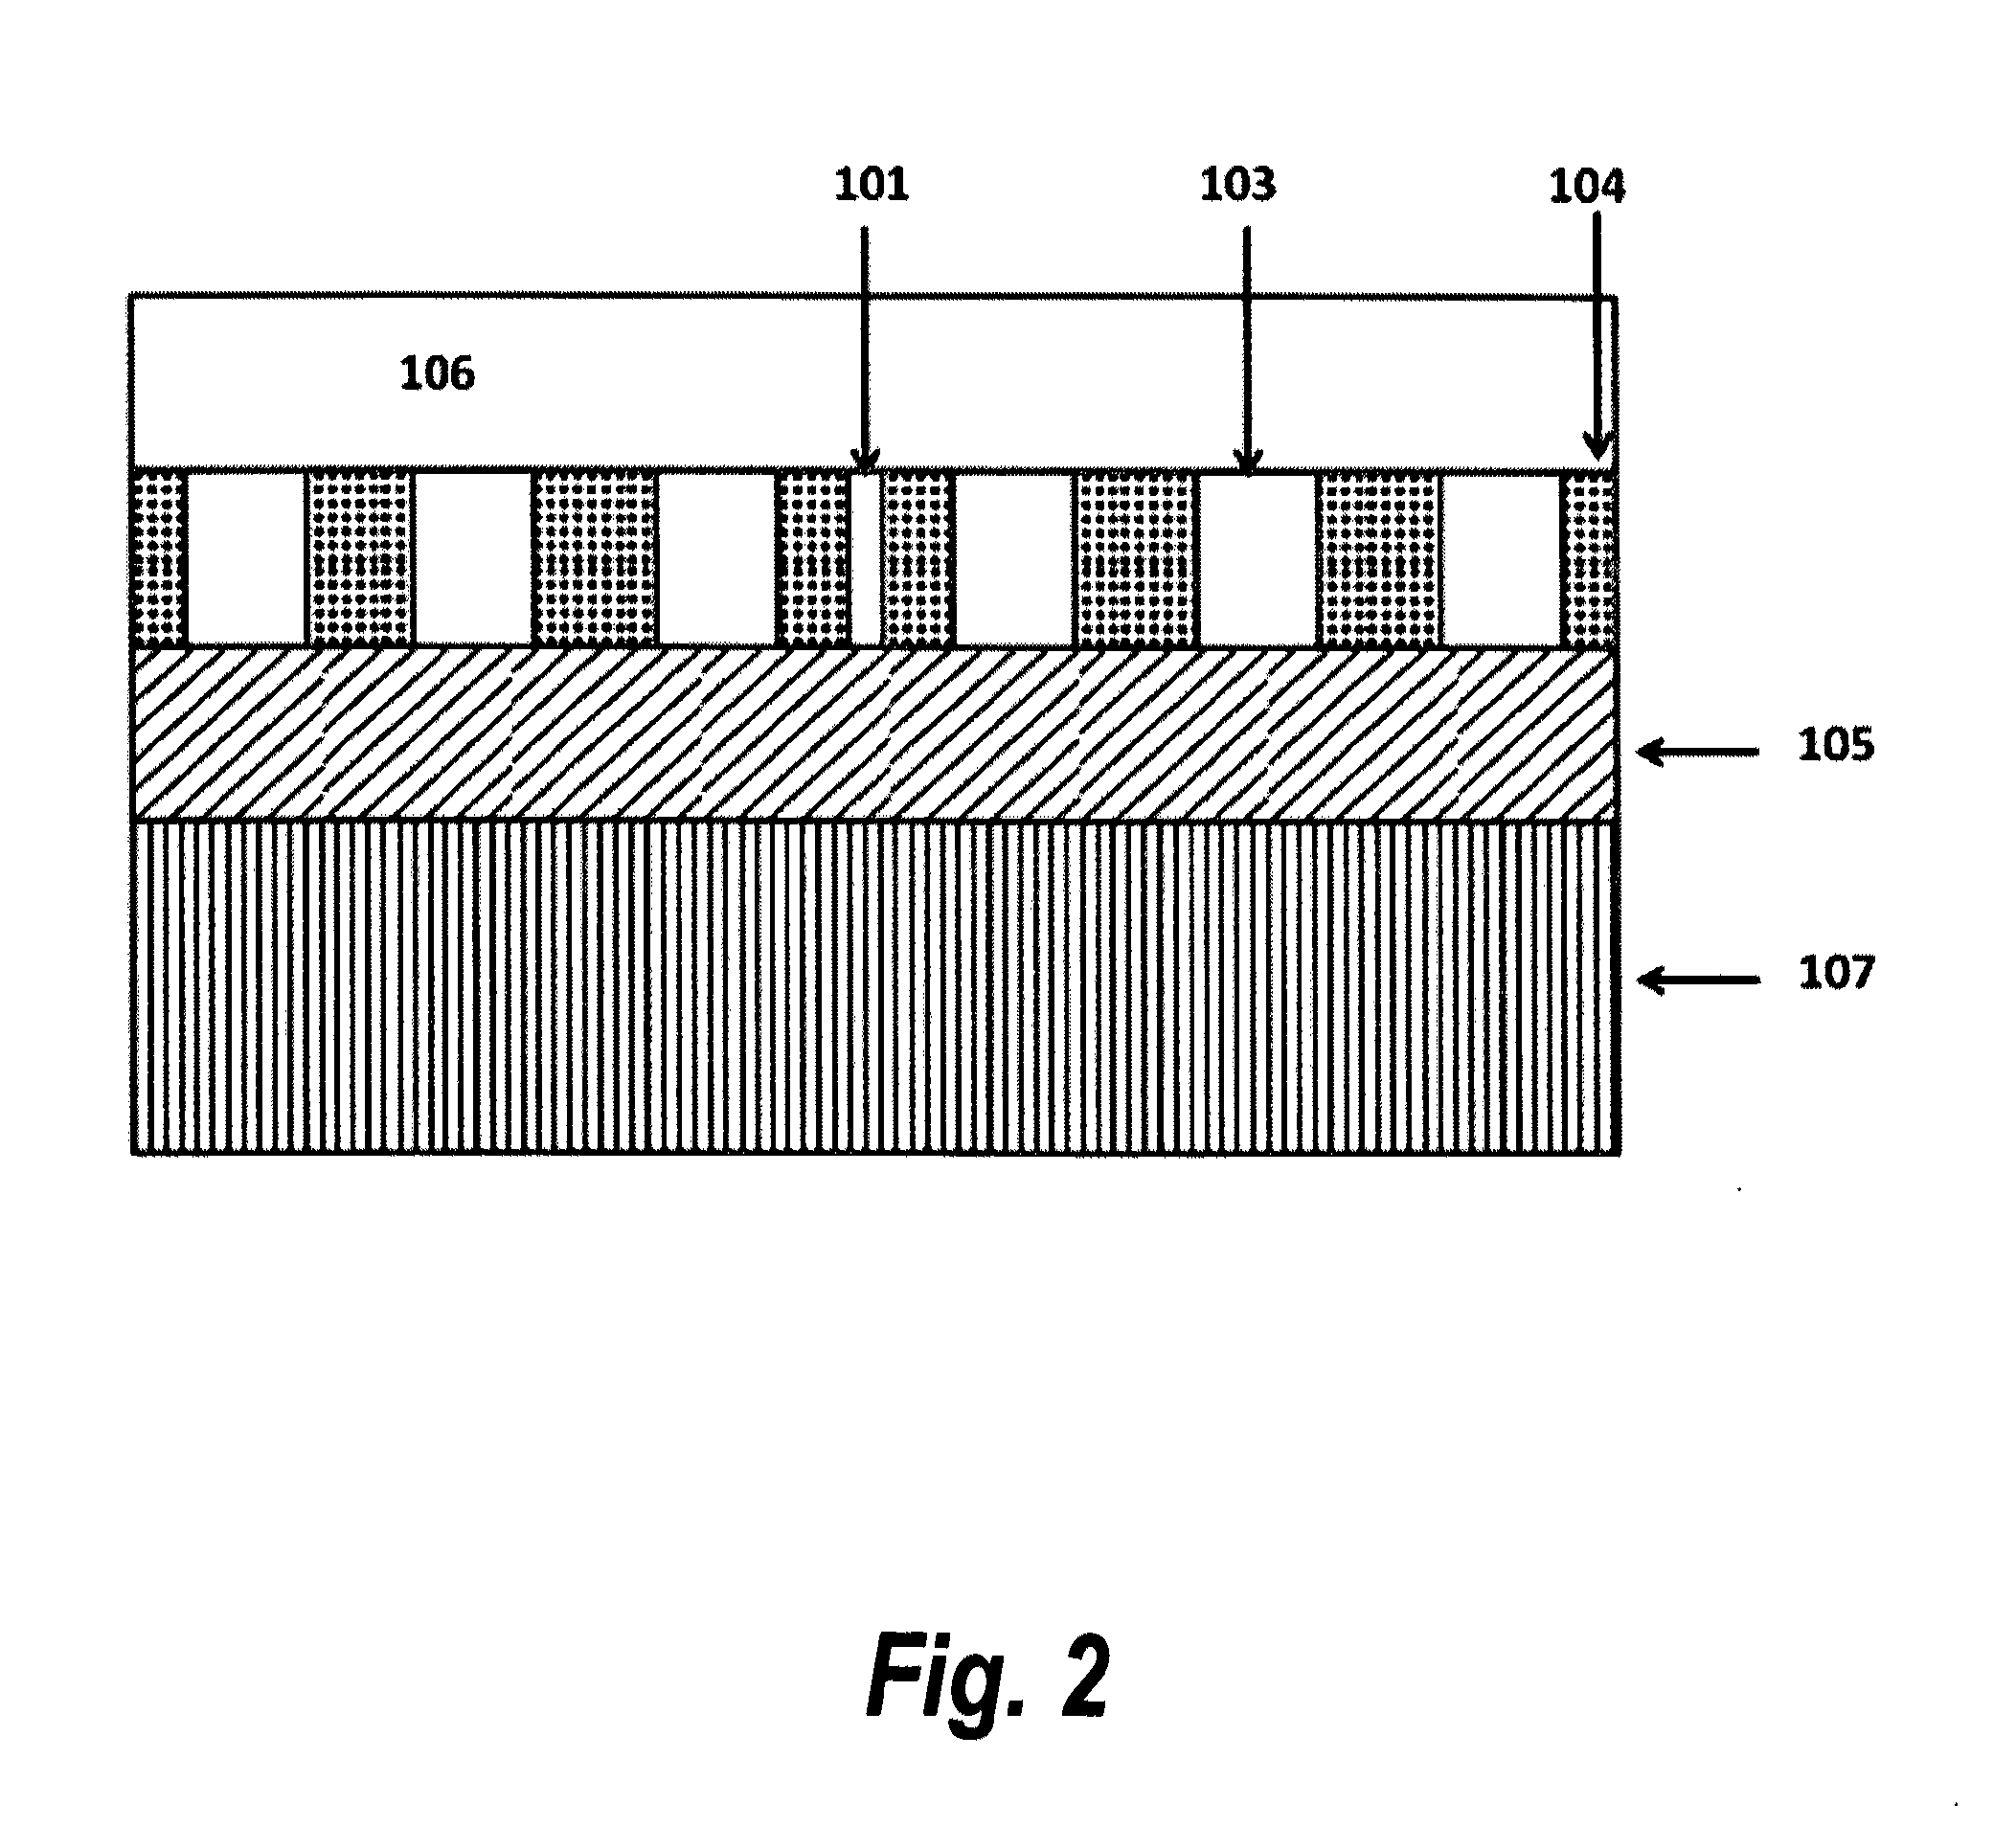 Photonic crystal slot waveguide miniature on-chip absorption spectrometer